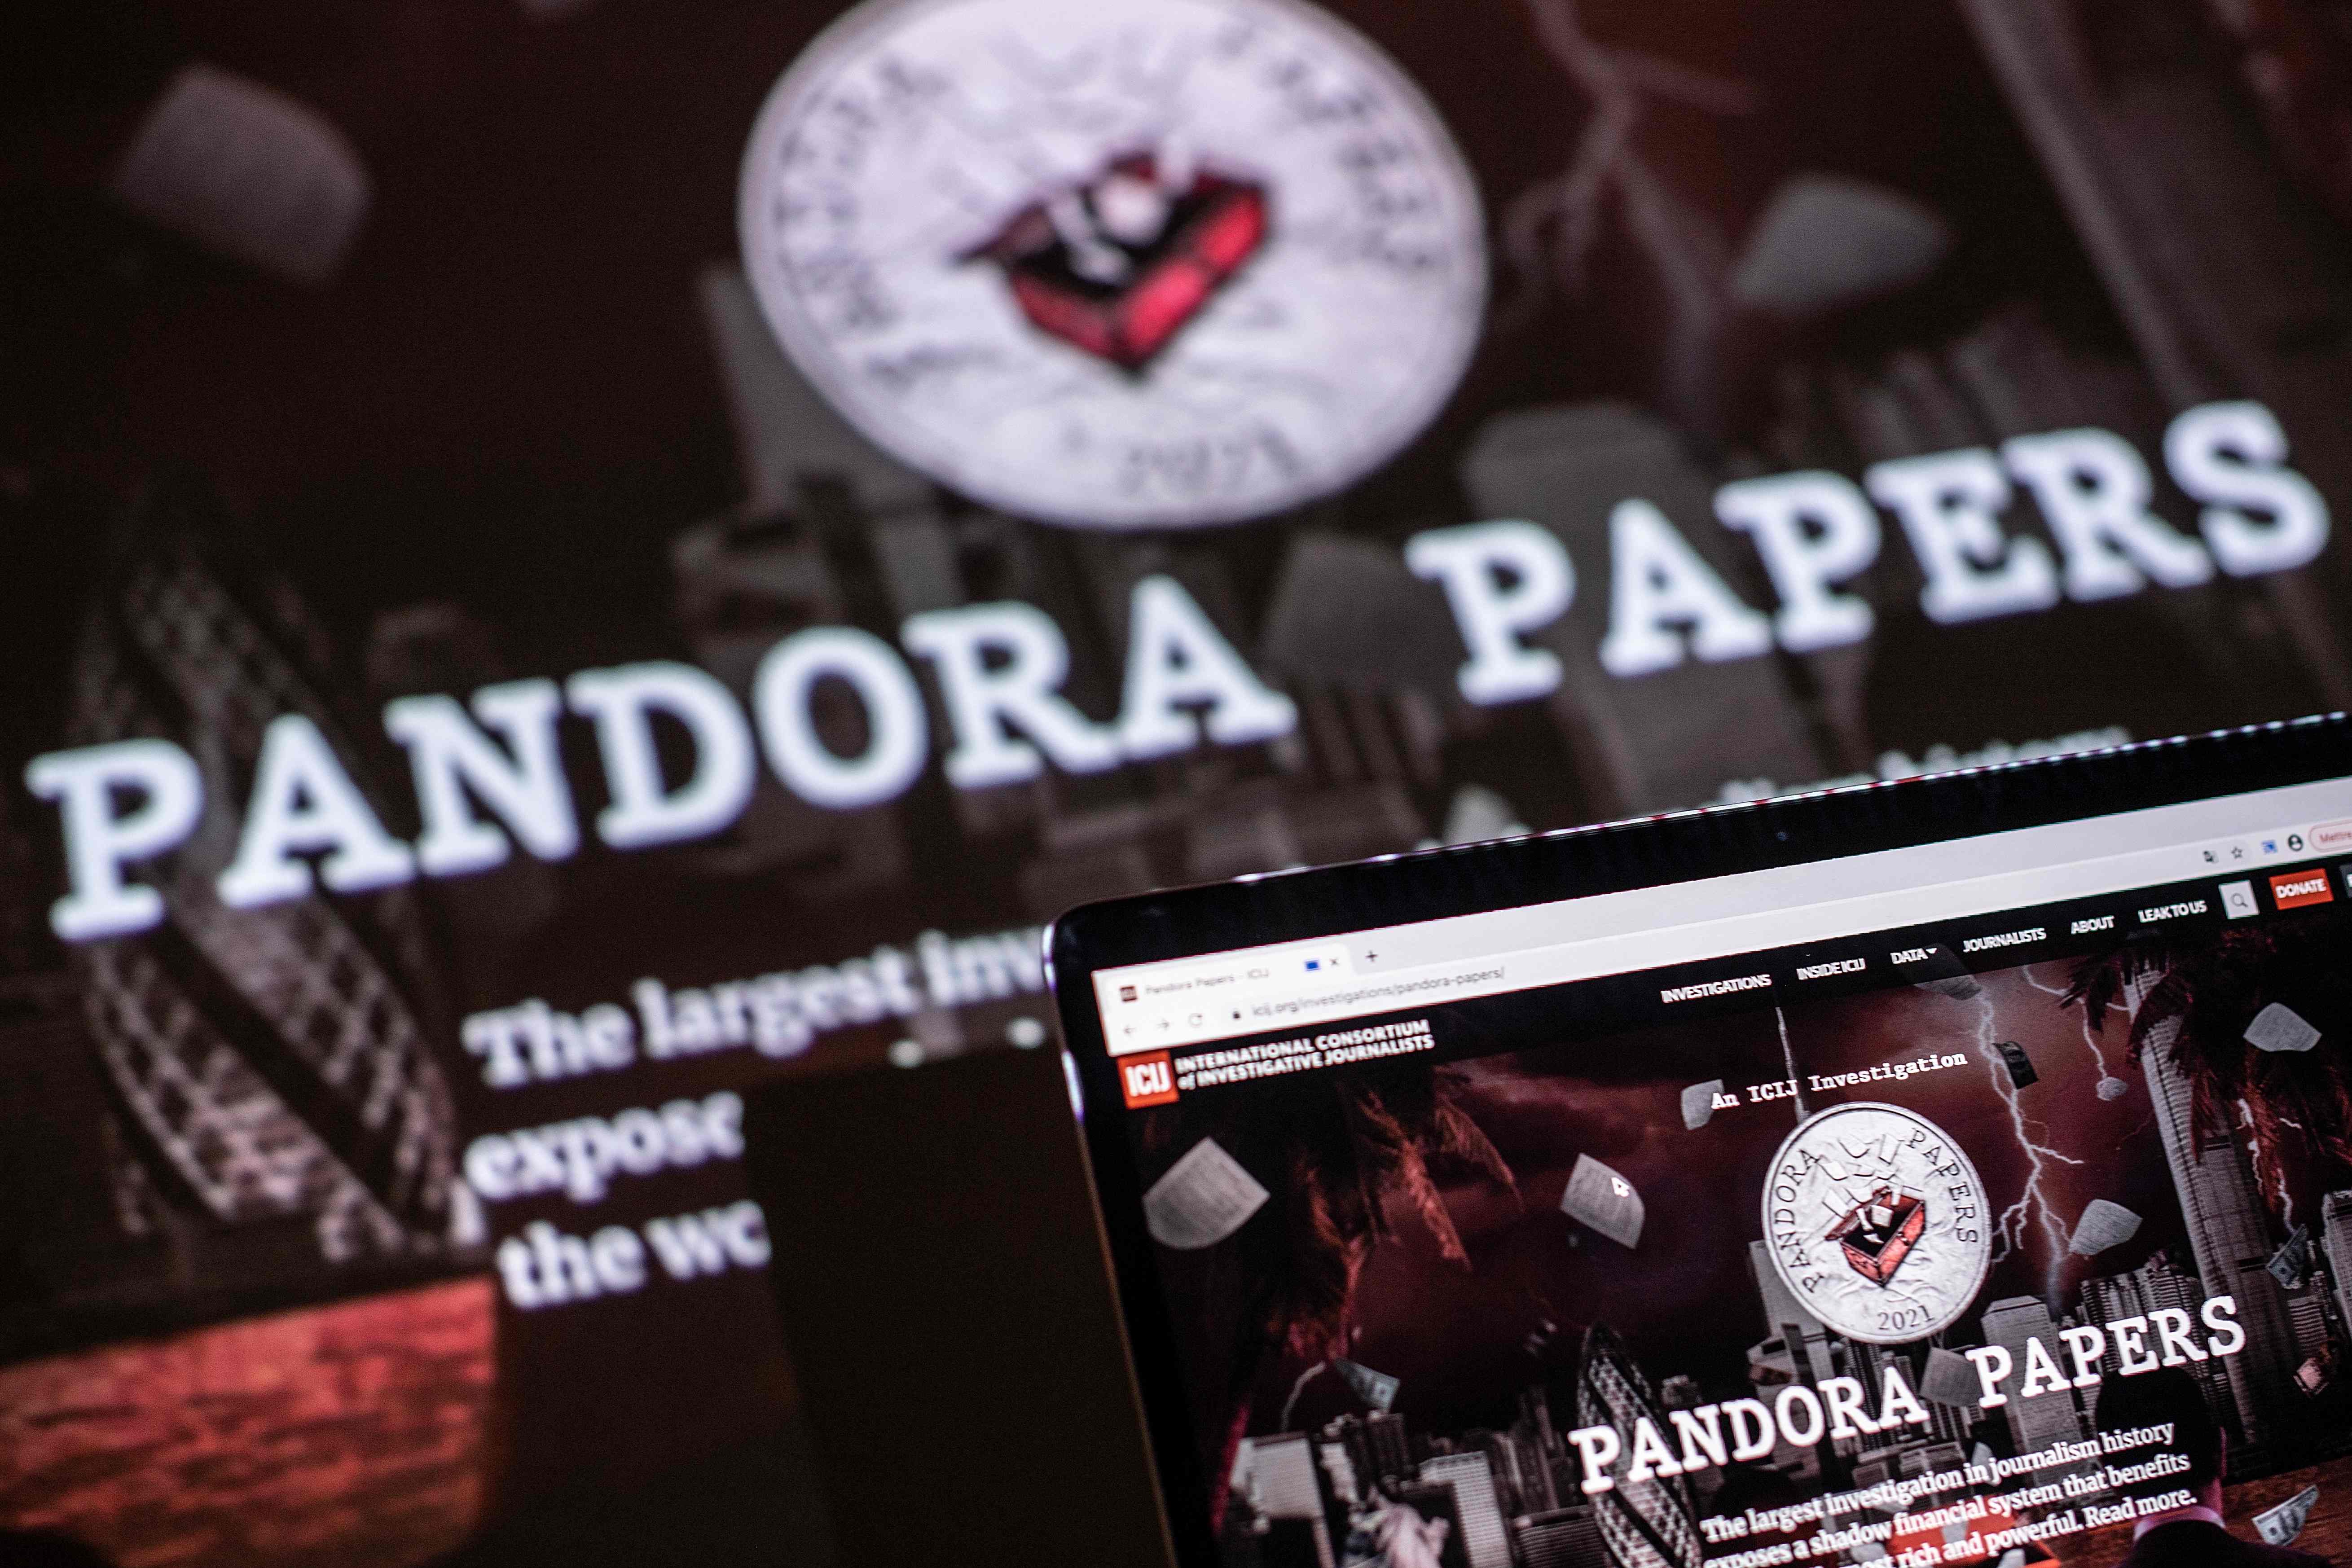 The Pandora Papers expose systems of hiding wealth and lavish purchases